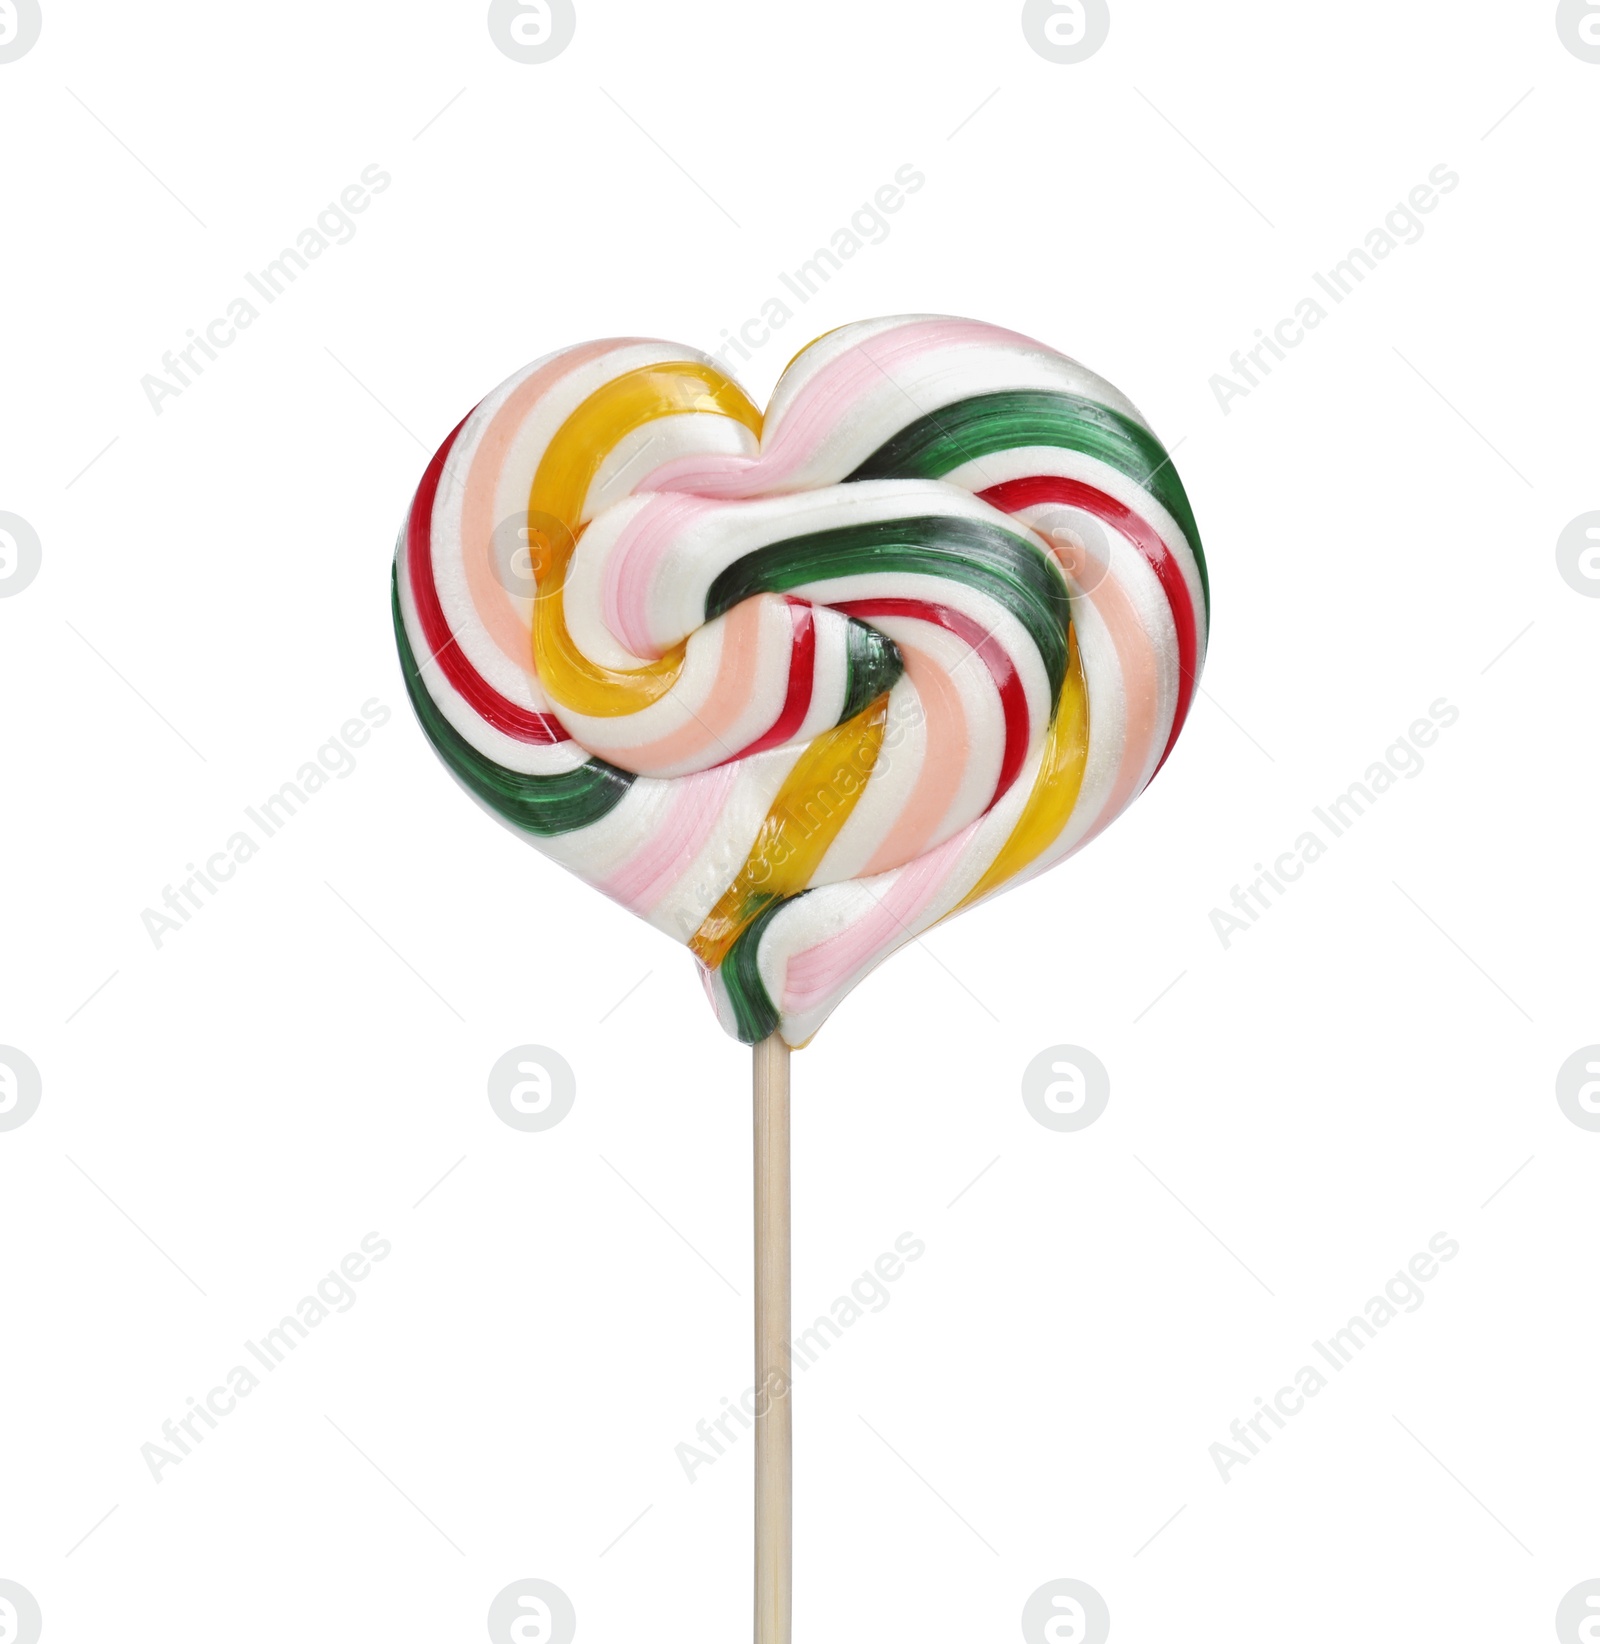 Photo of Heart shaped lollipop on stick isolated on white